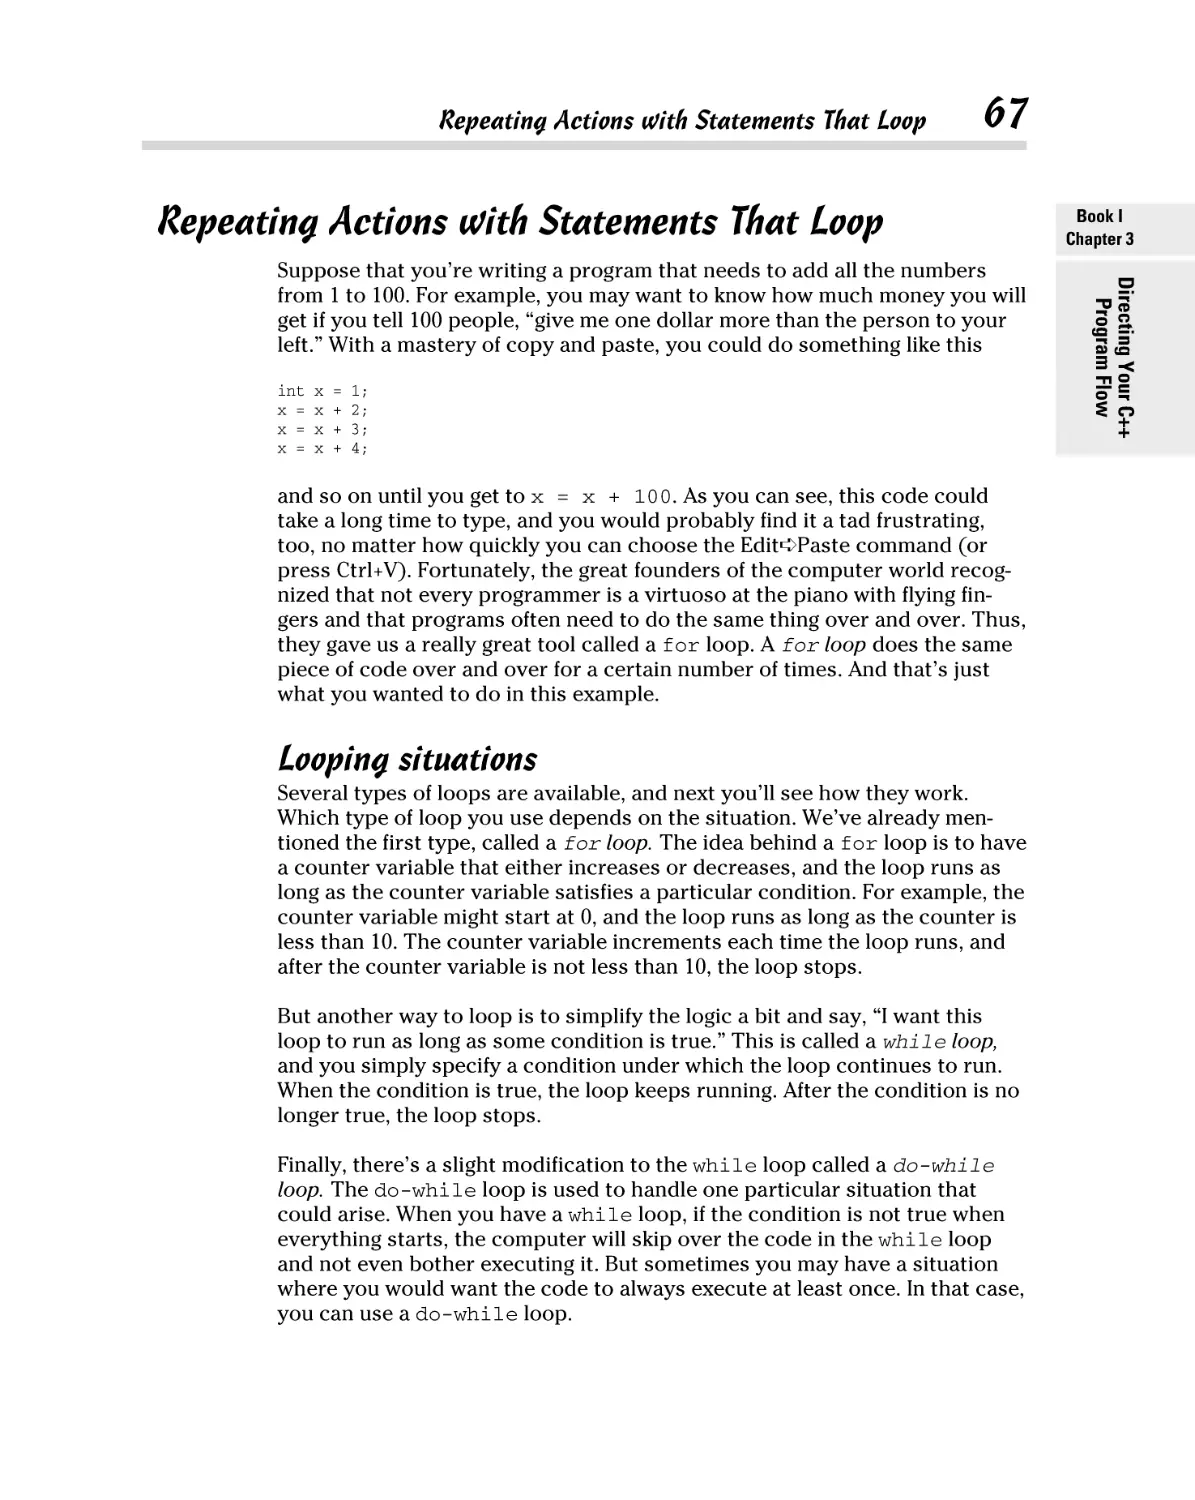 Repeating Actions with Statements That Loop